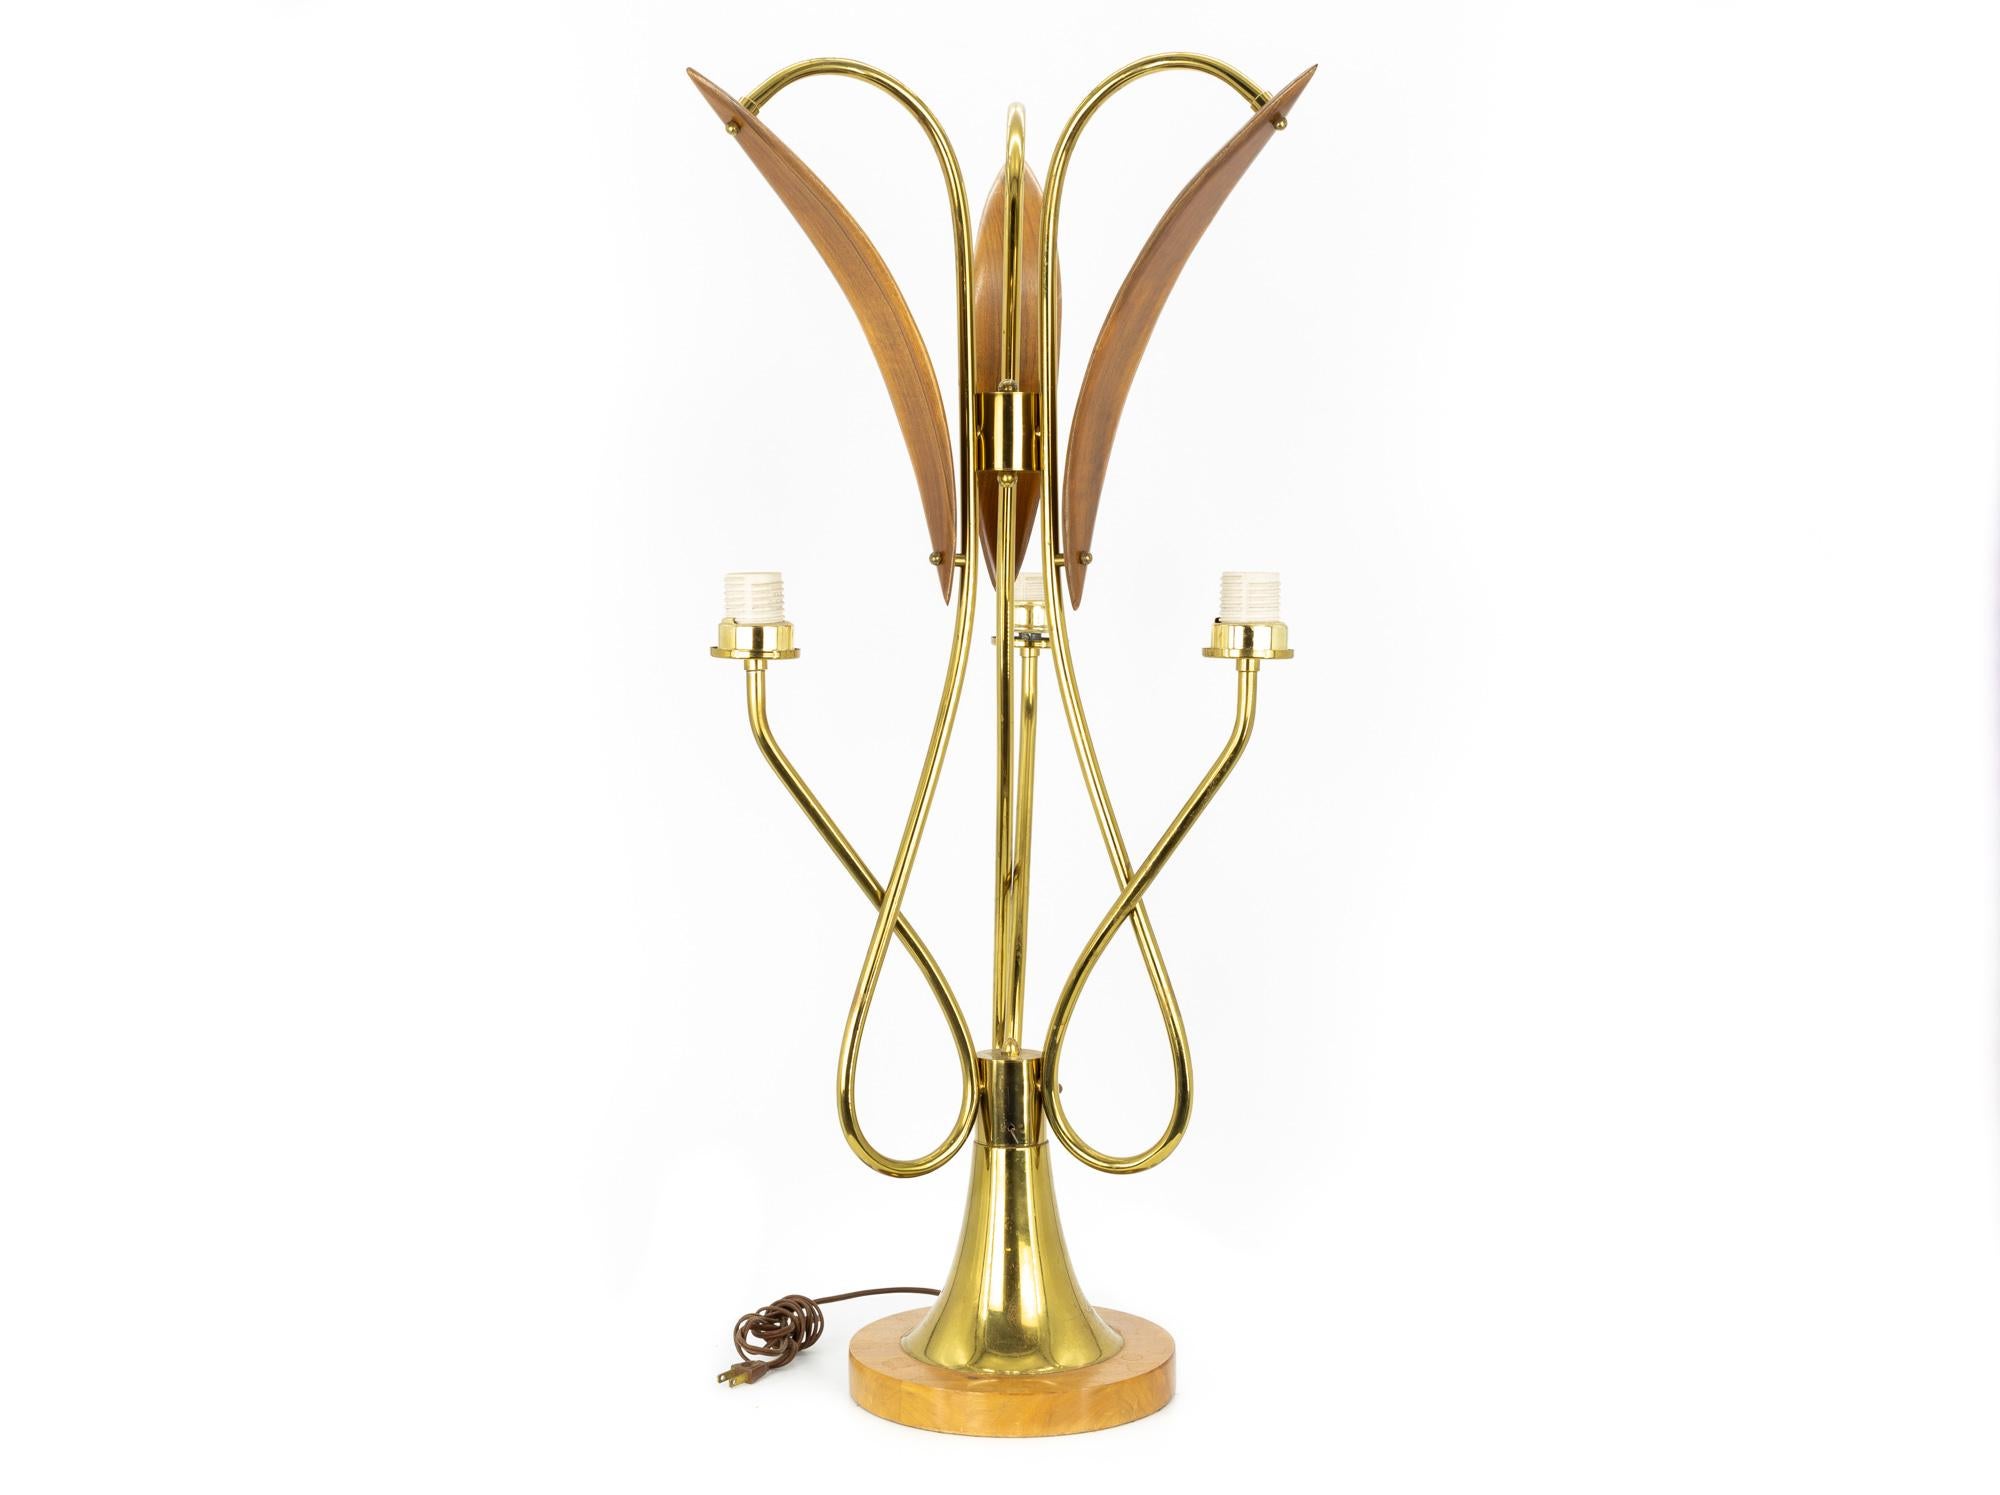 Late 20th Century Nomina Organica Mid Century Brass Walnut Lamps - Pair For Sale